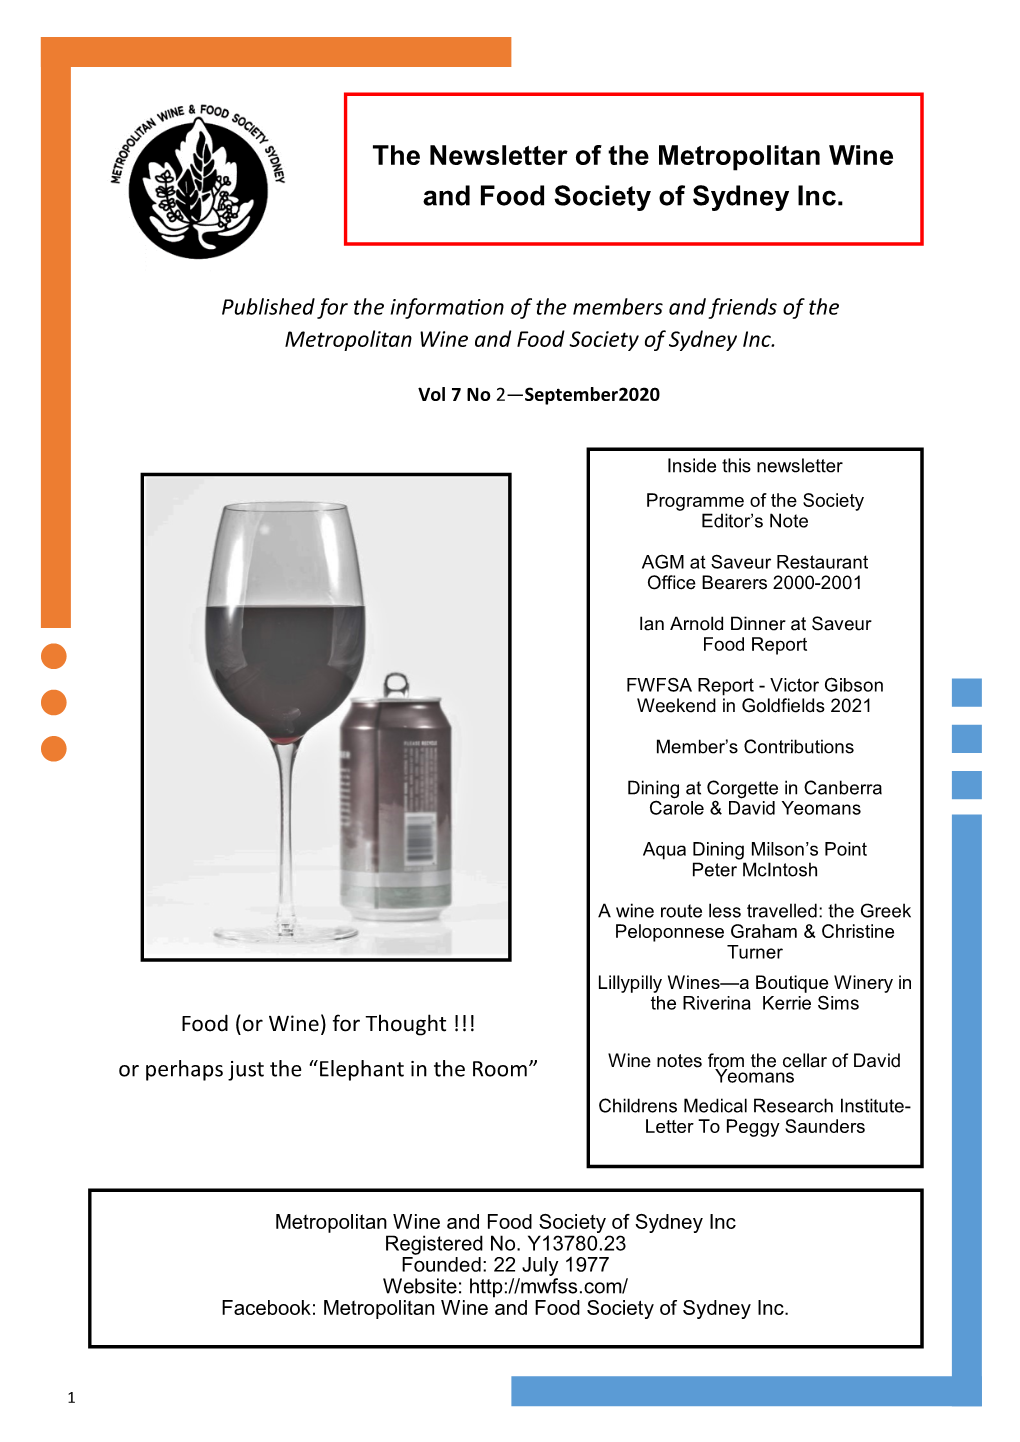 The Newsletter of the Metropolitan Wine and Food Society of Sydney Inc